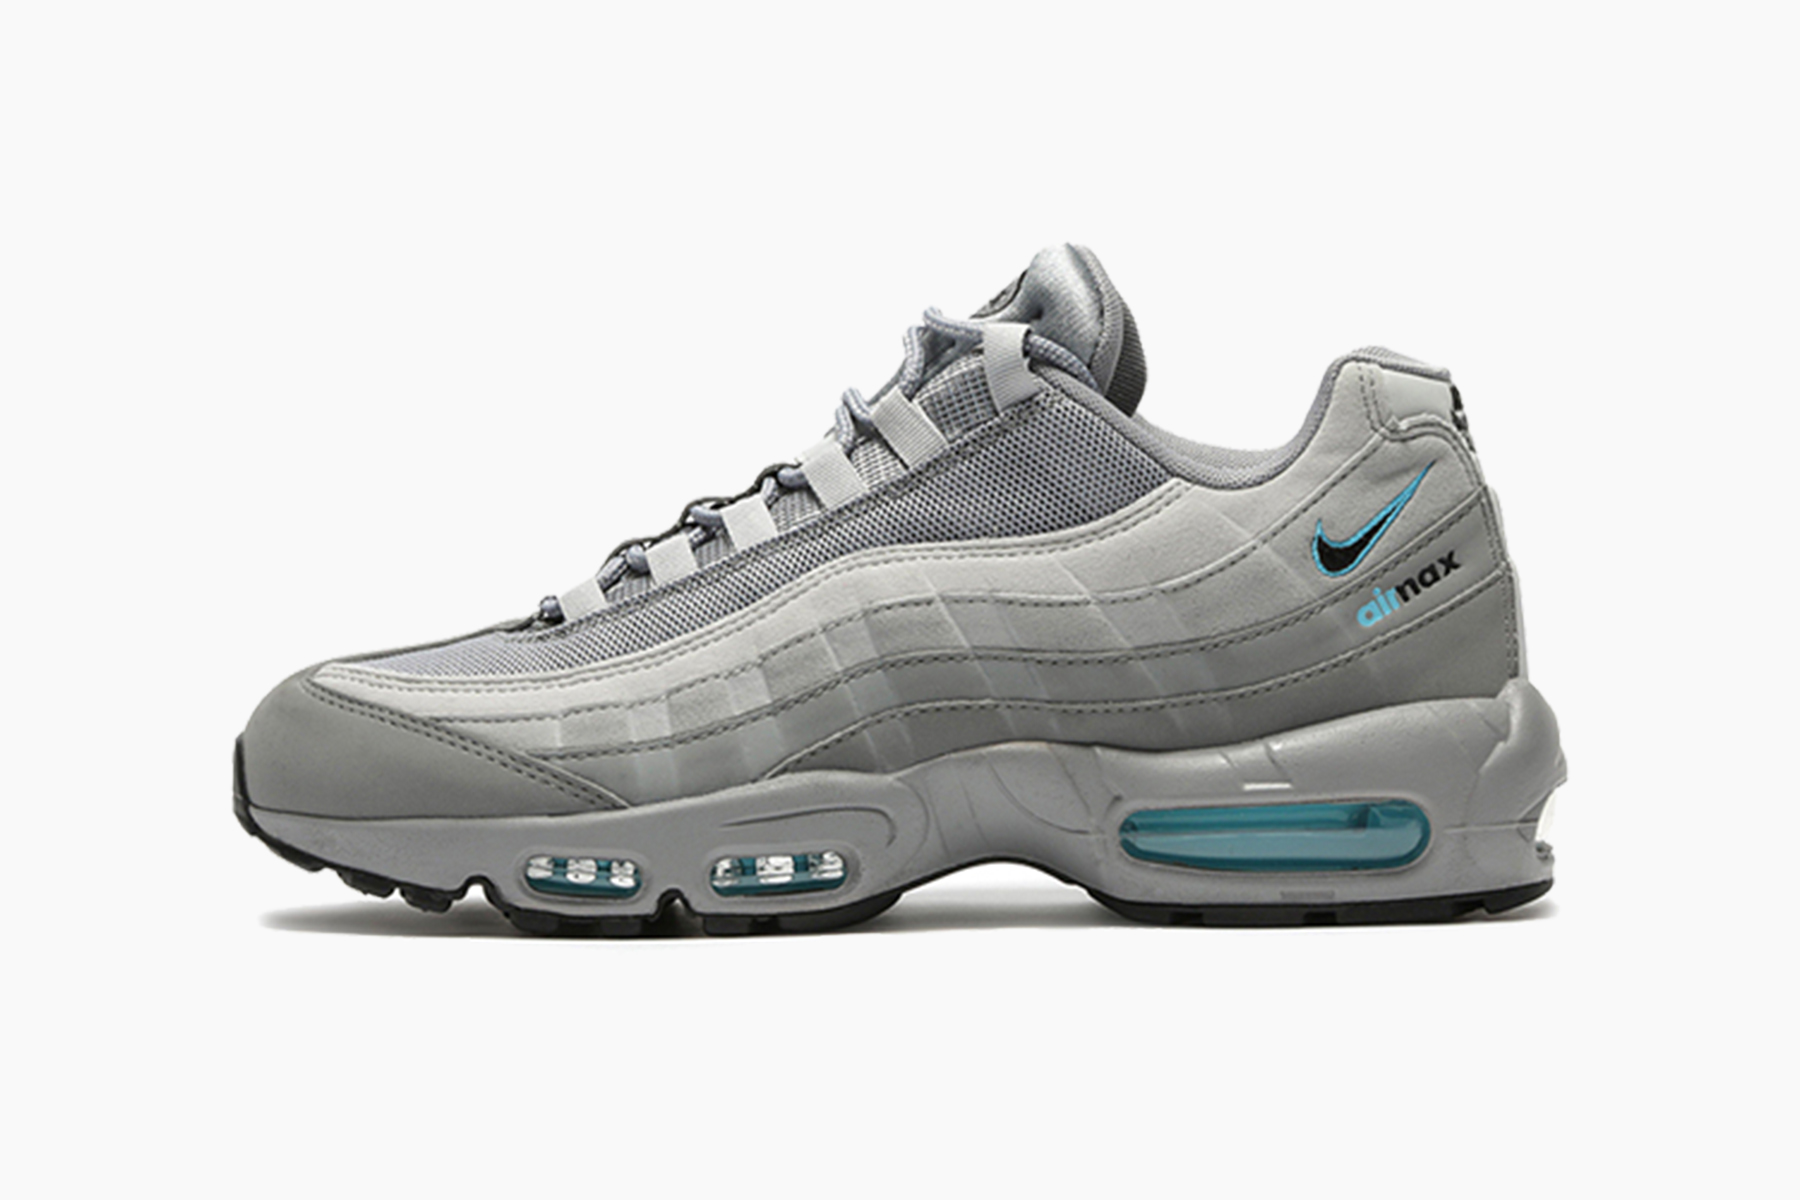 JD Sports Drop Exclusive Nike Air Max 95 in Grey/Blue | HYPEBEAST